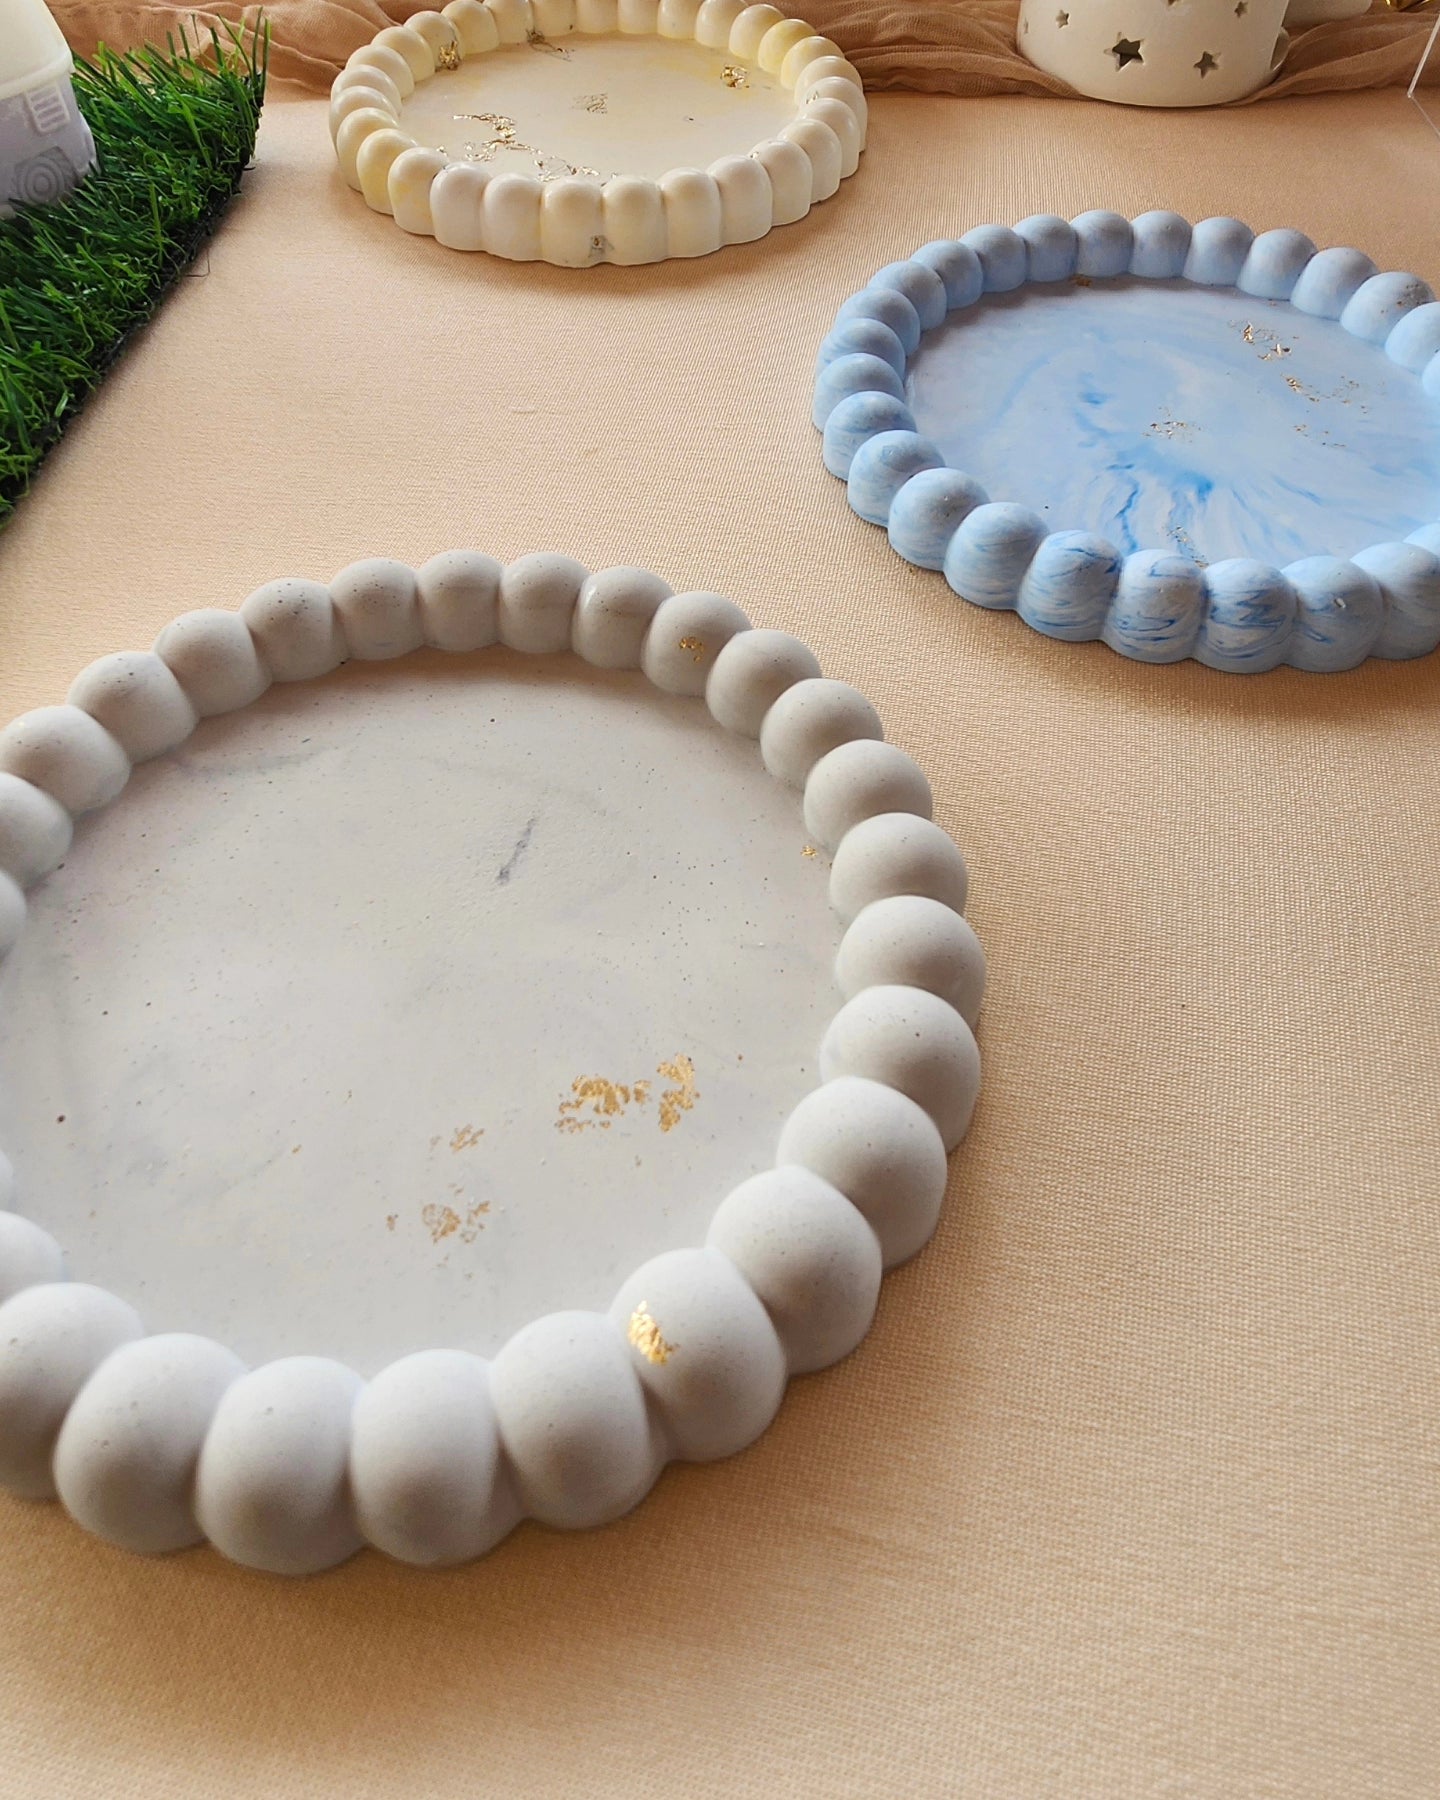 Simple round tray